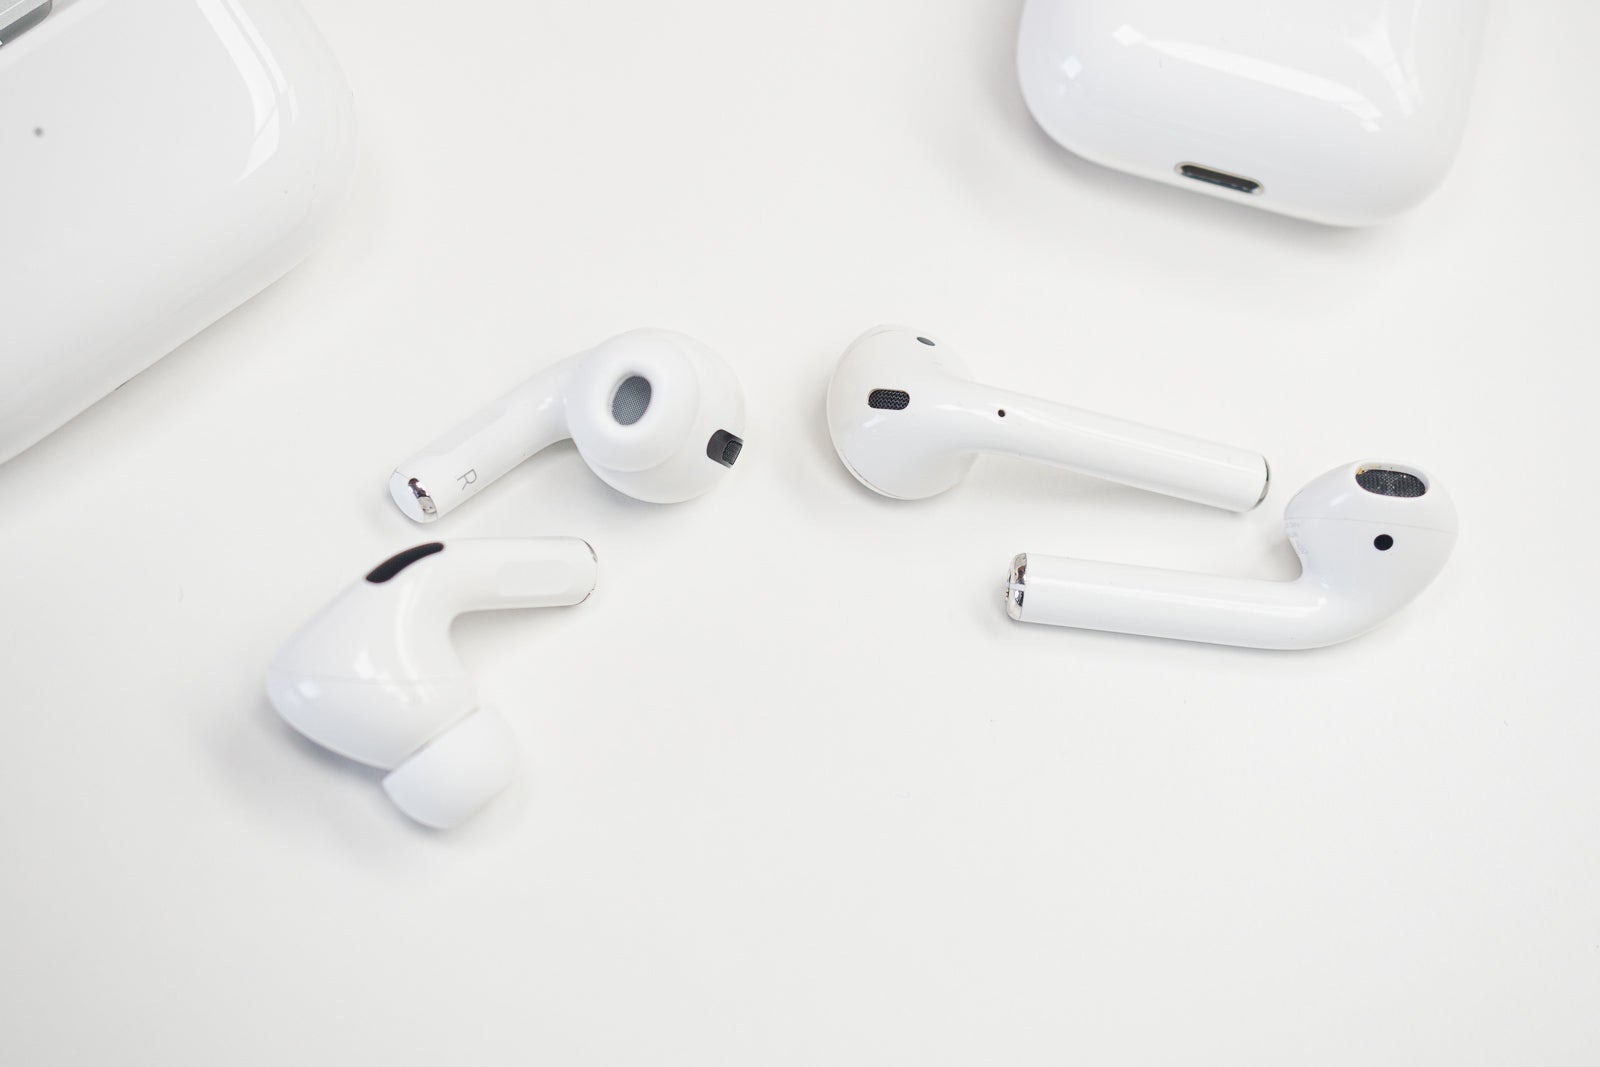 Current Apple AirPods Pro and entry-level AirPods